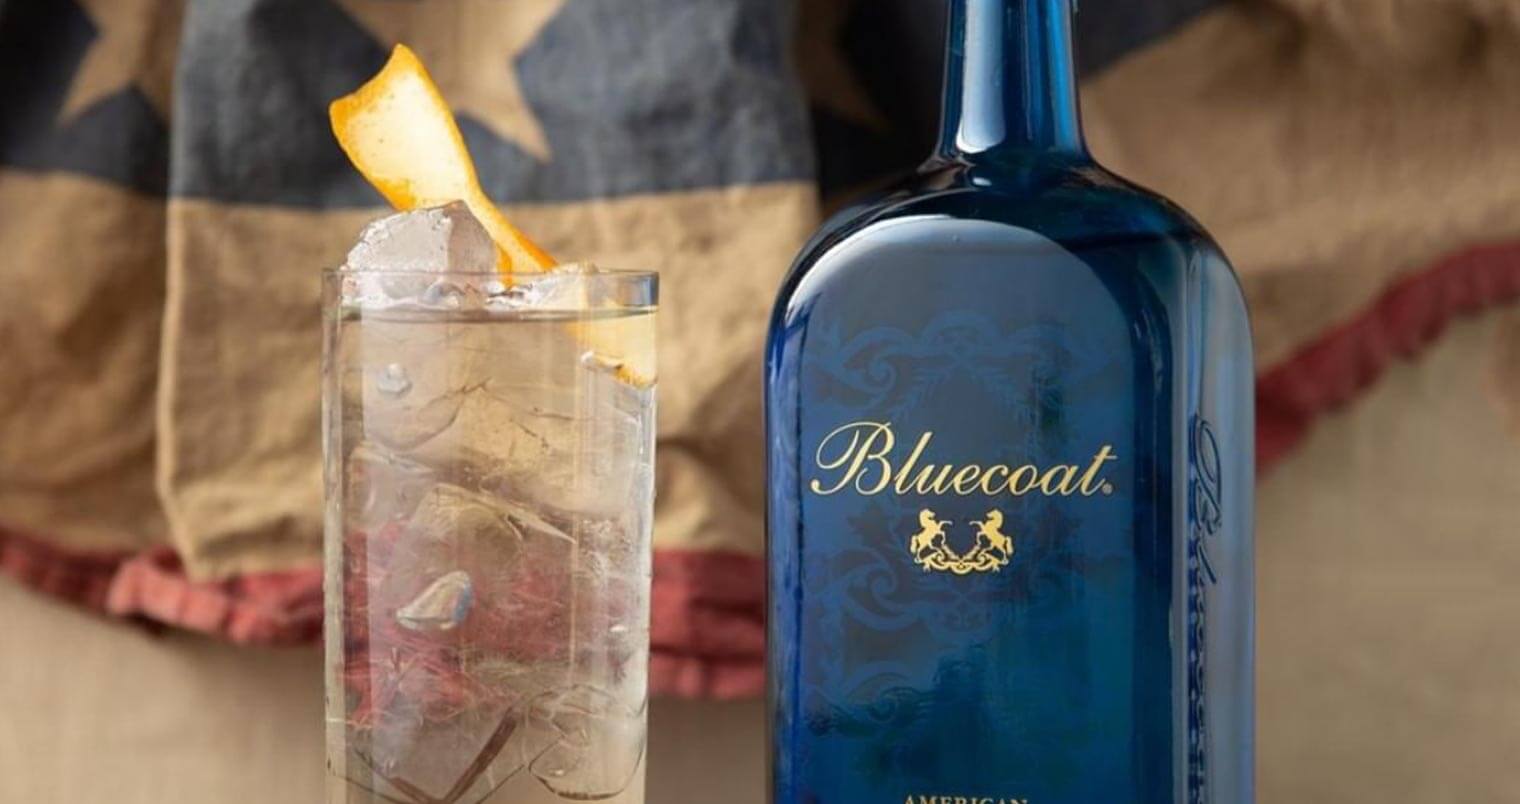 All-American GnT, cocktail and bottle with old american flag, featured image